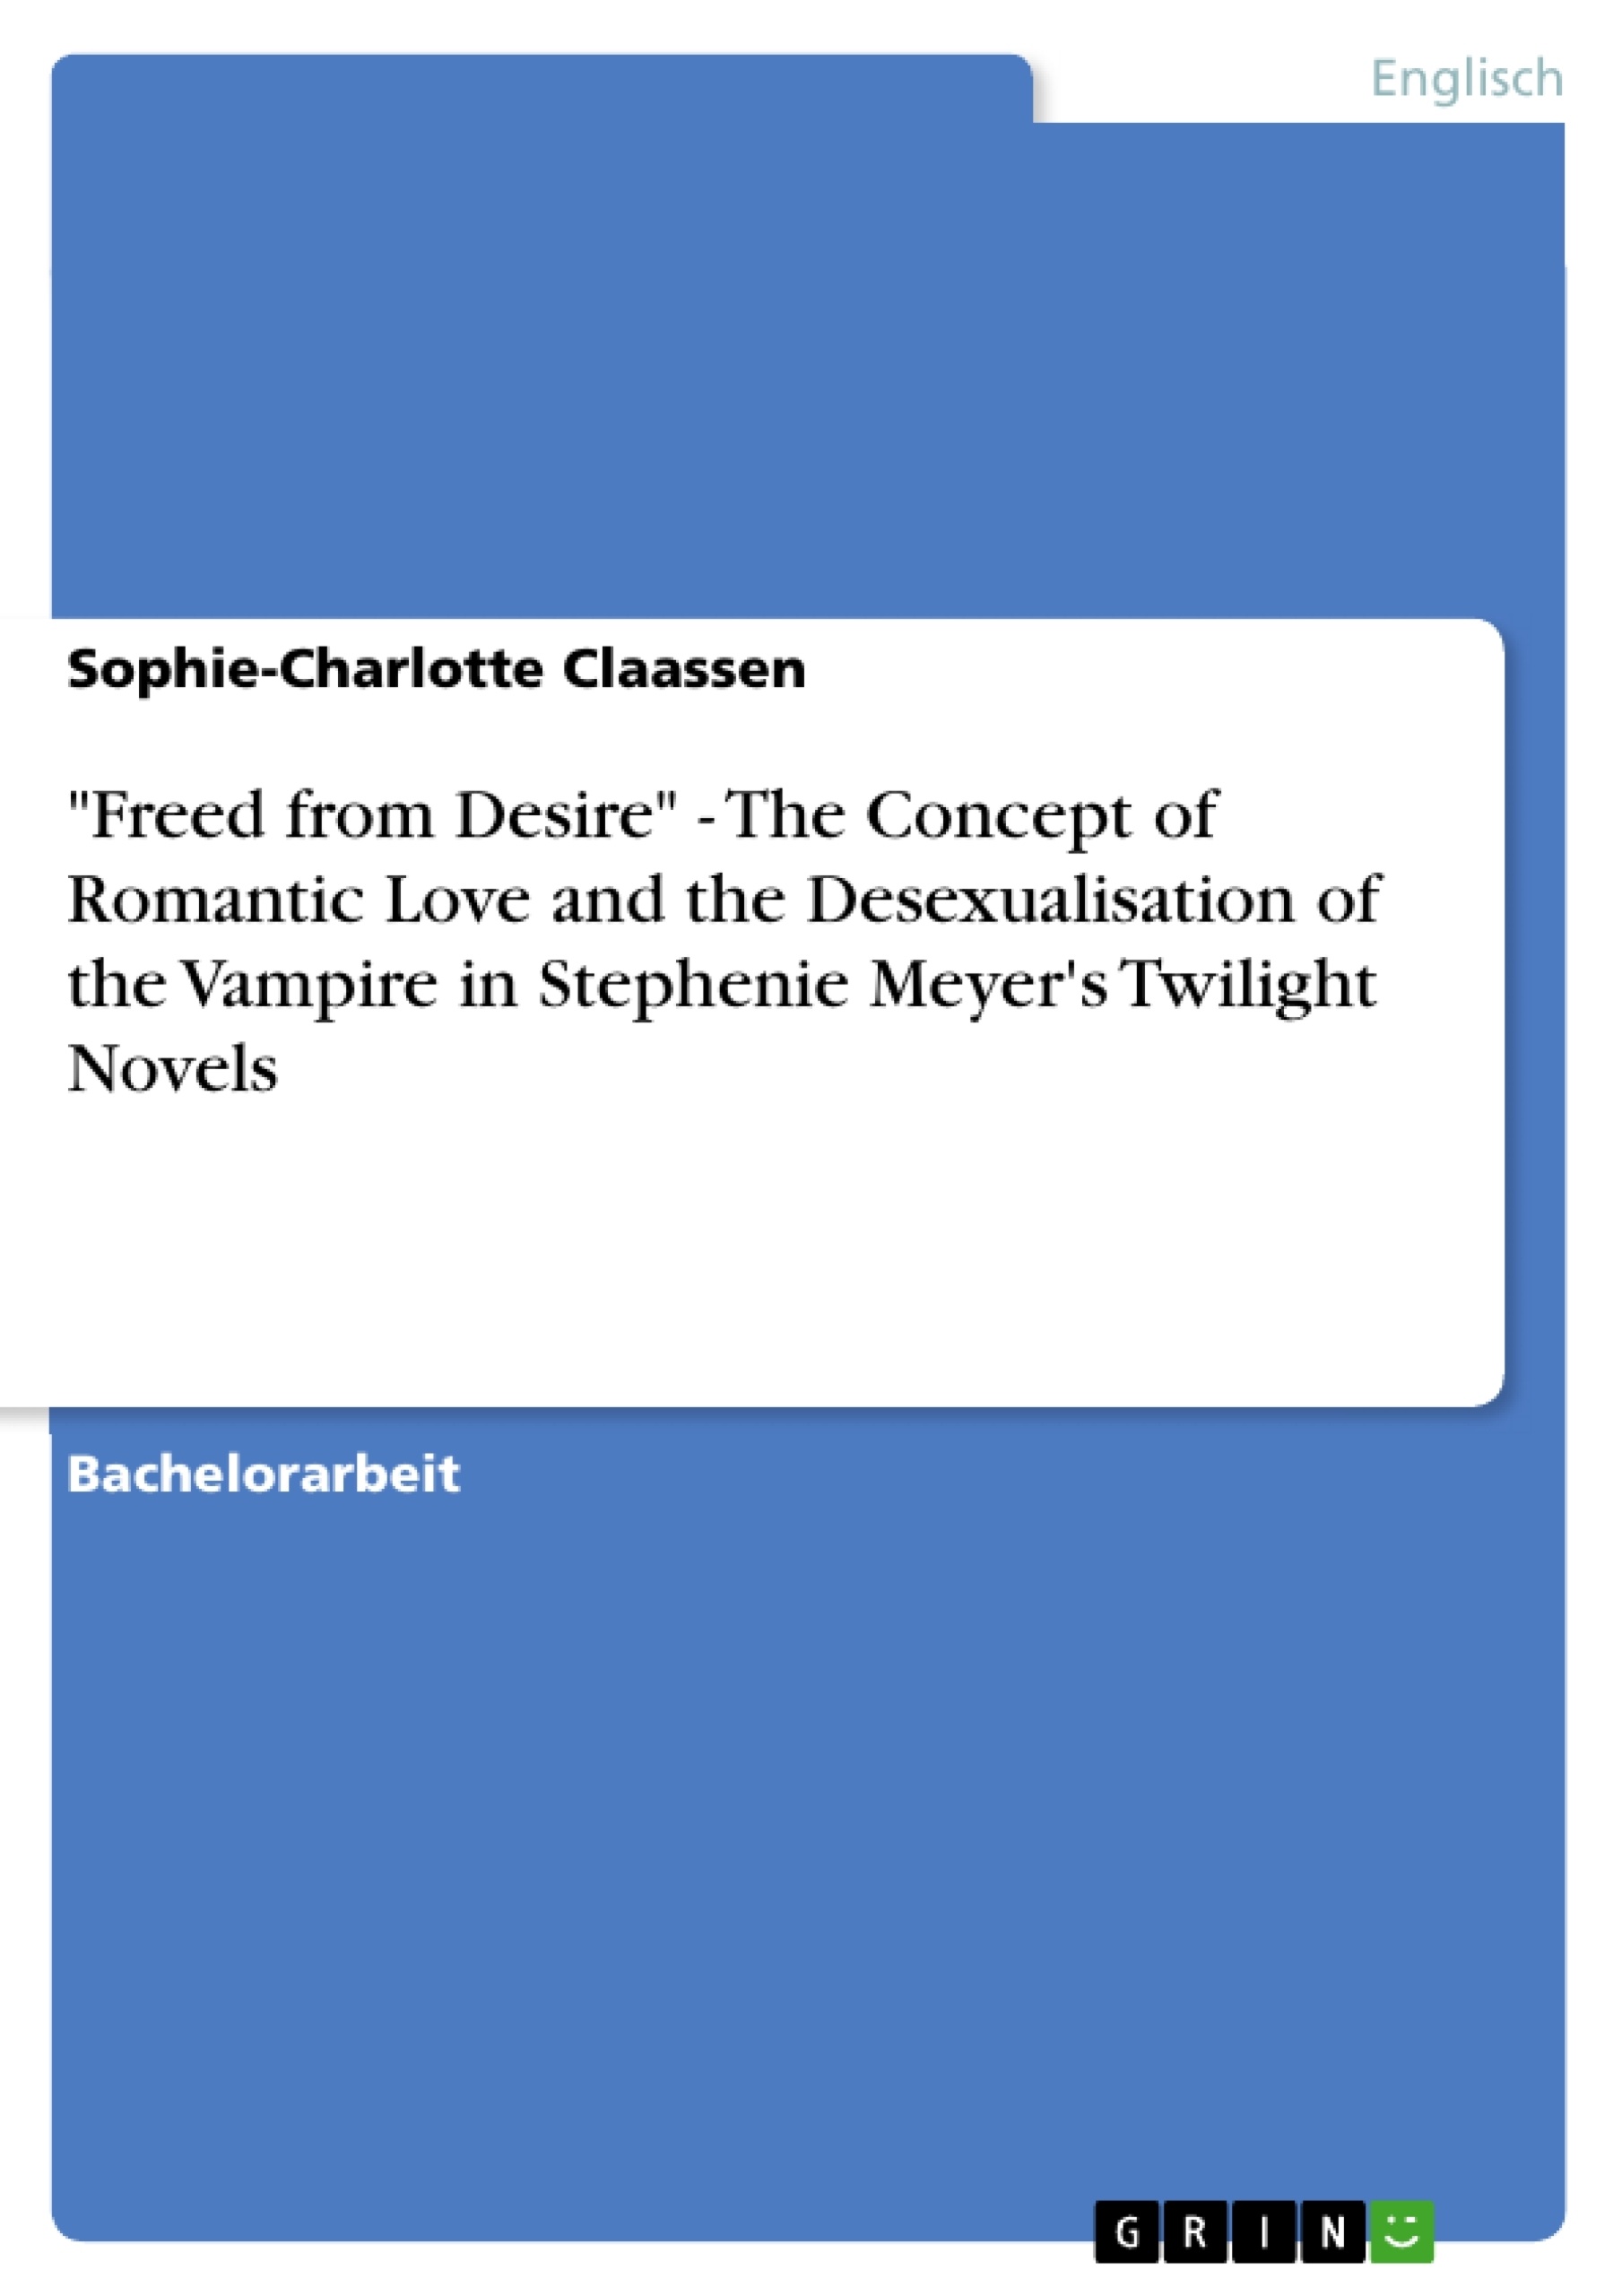 Titel: "Freed from Desire" - The Concept of Romantic Love and the Desexualisation of the Vampire in Stephenie Meyer's Twilight Novels